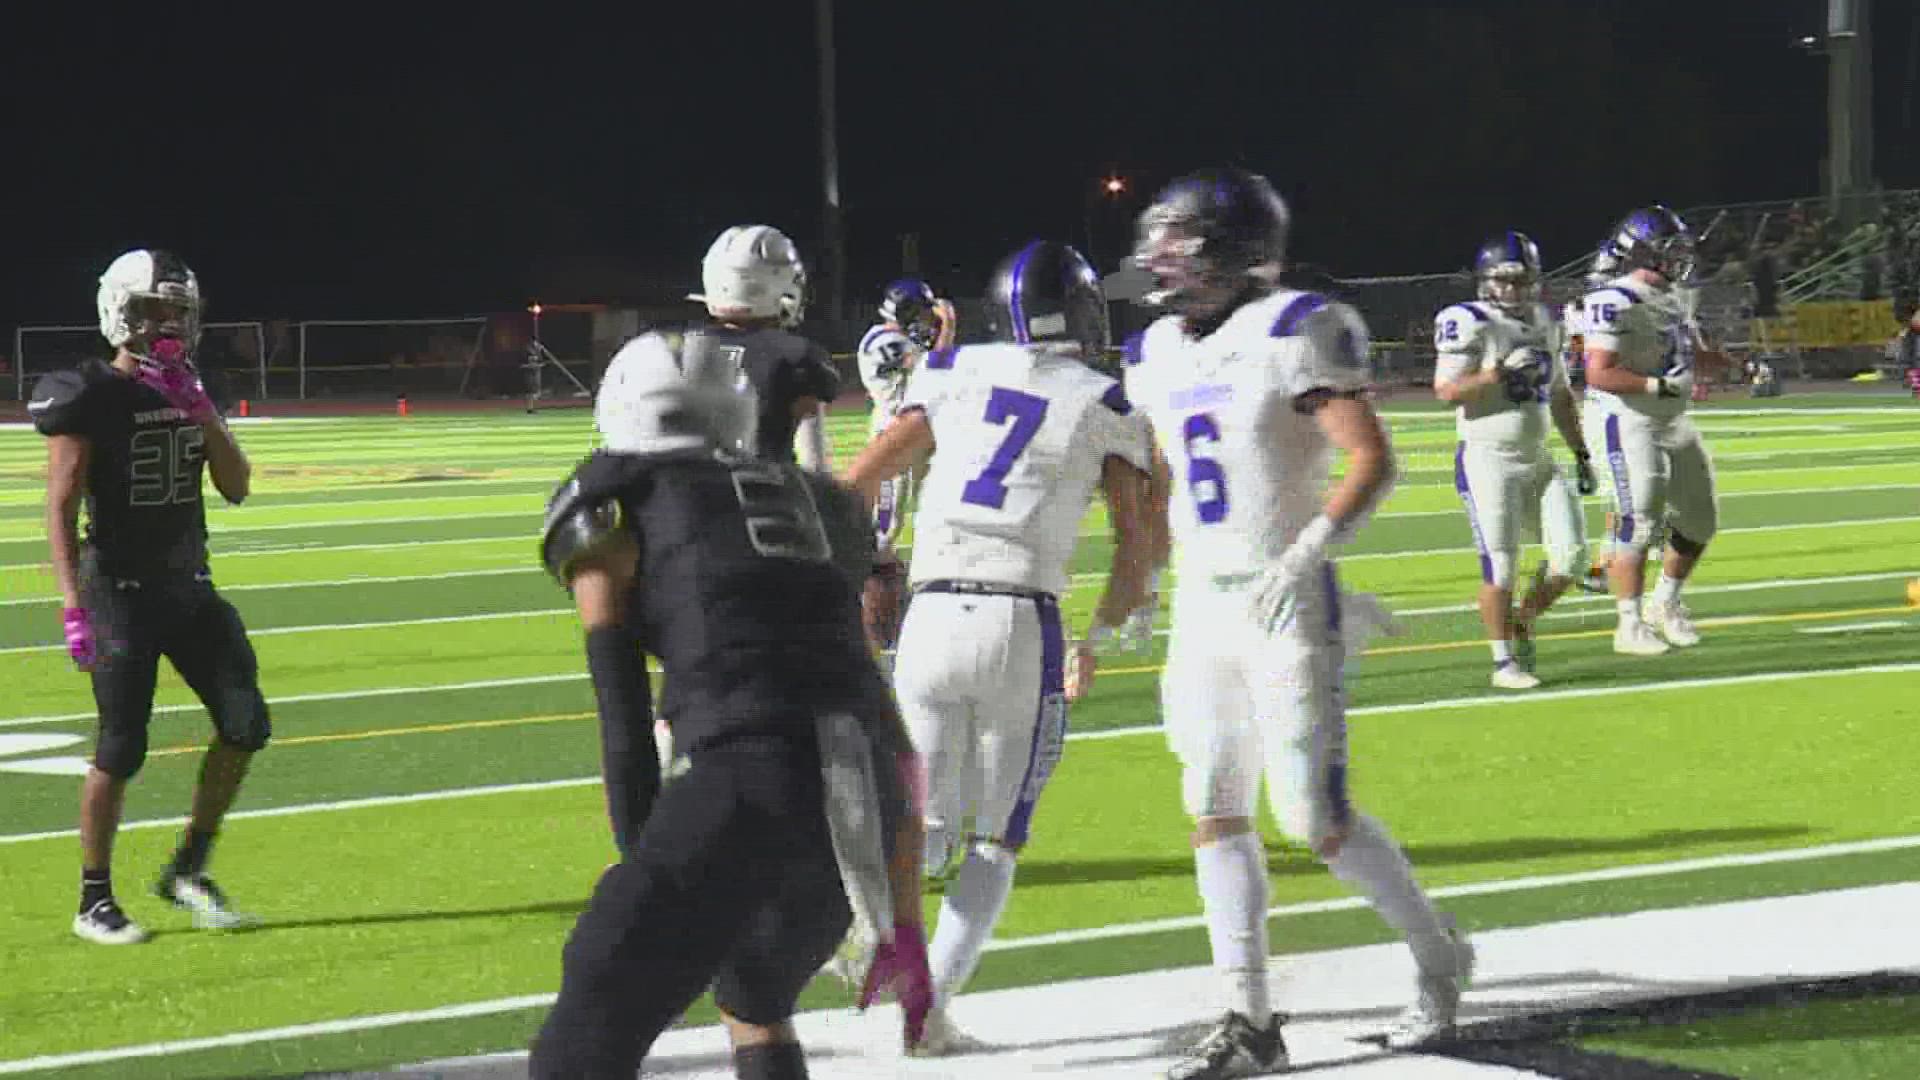 The Crusaders cruised to a week 7 win over Greenway.